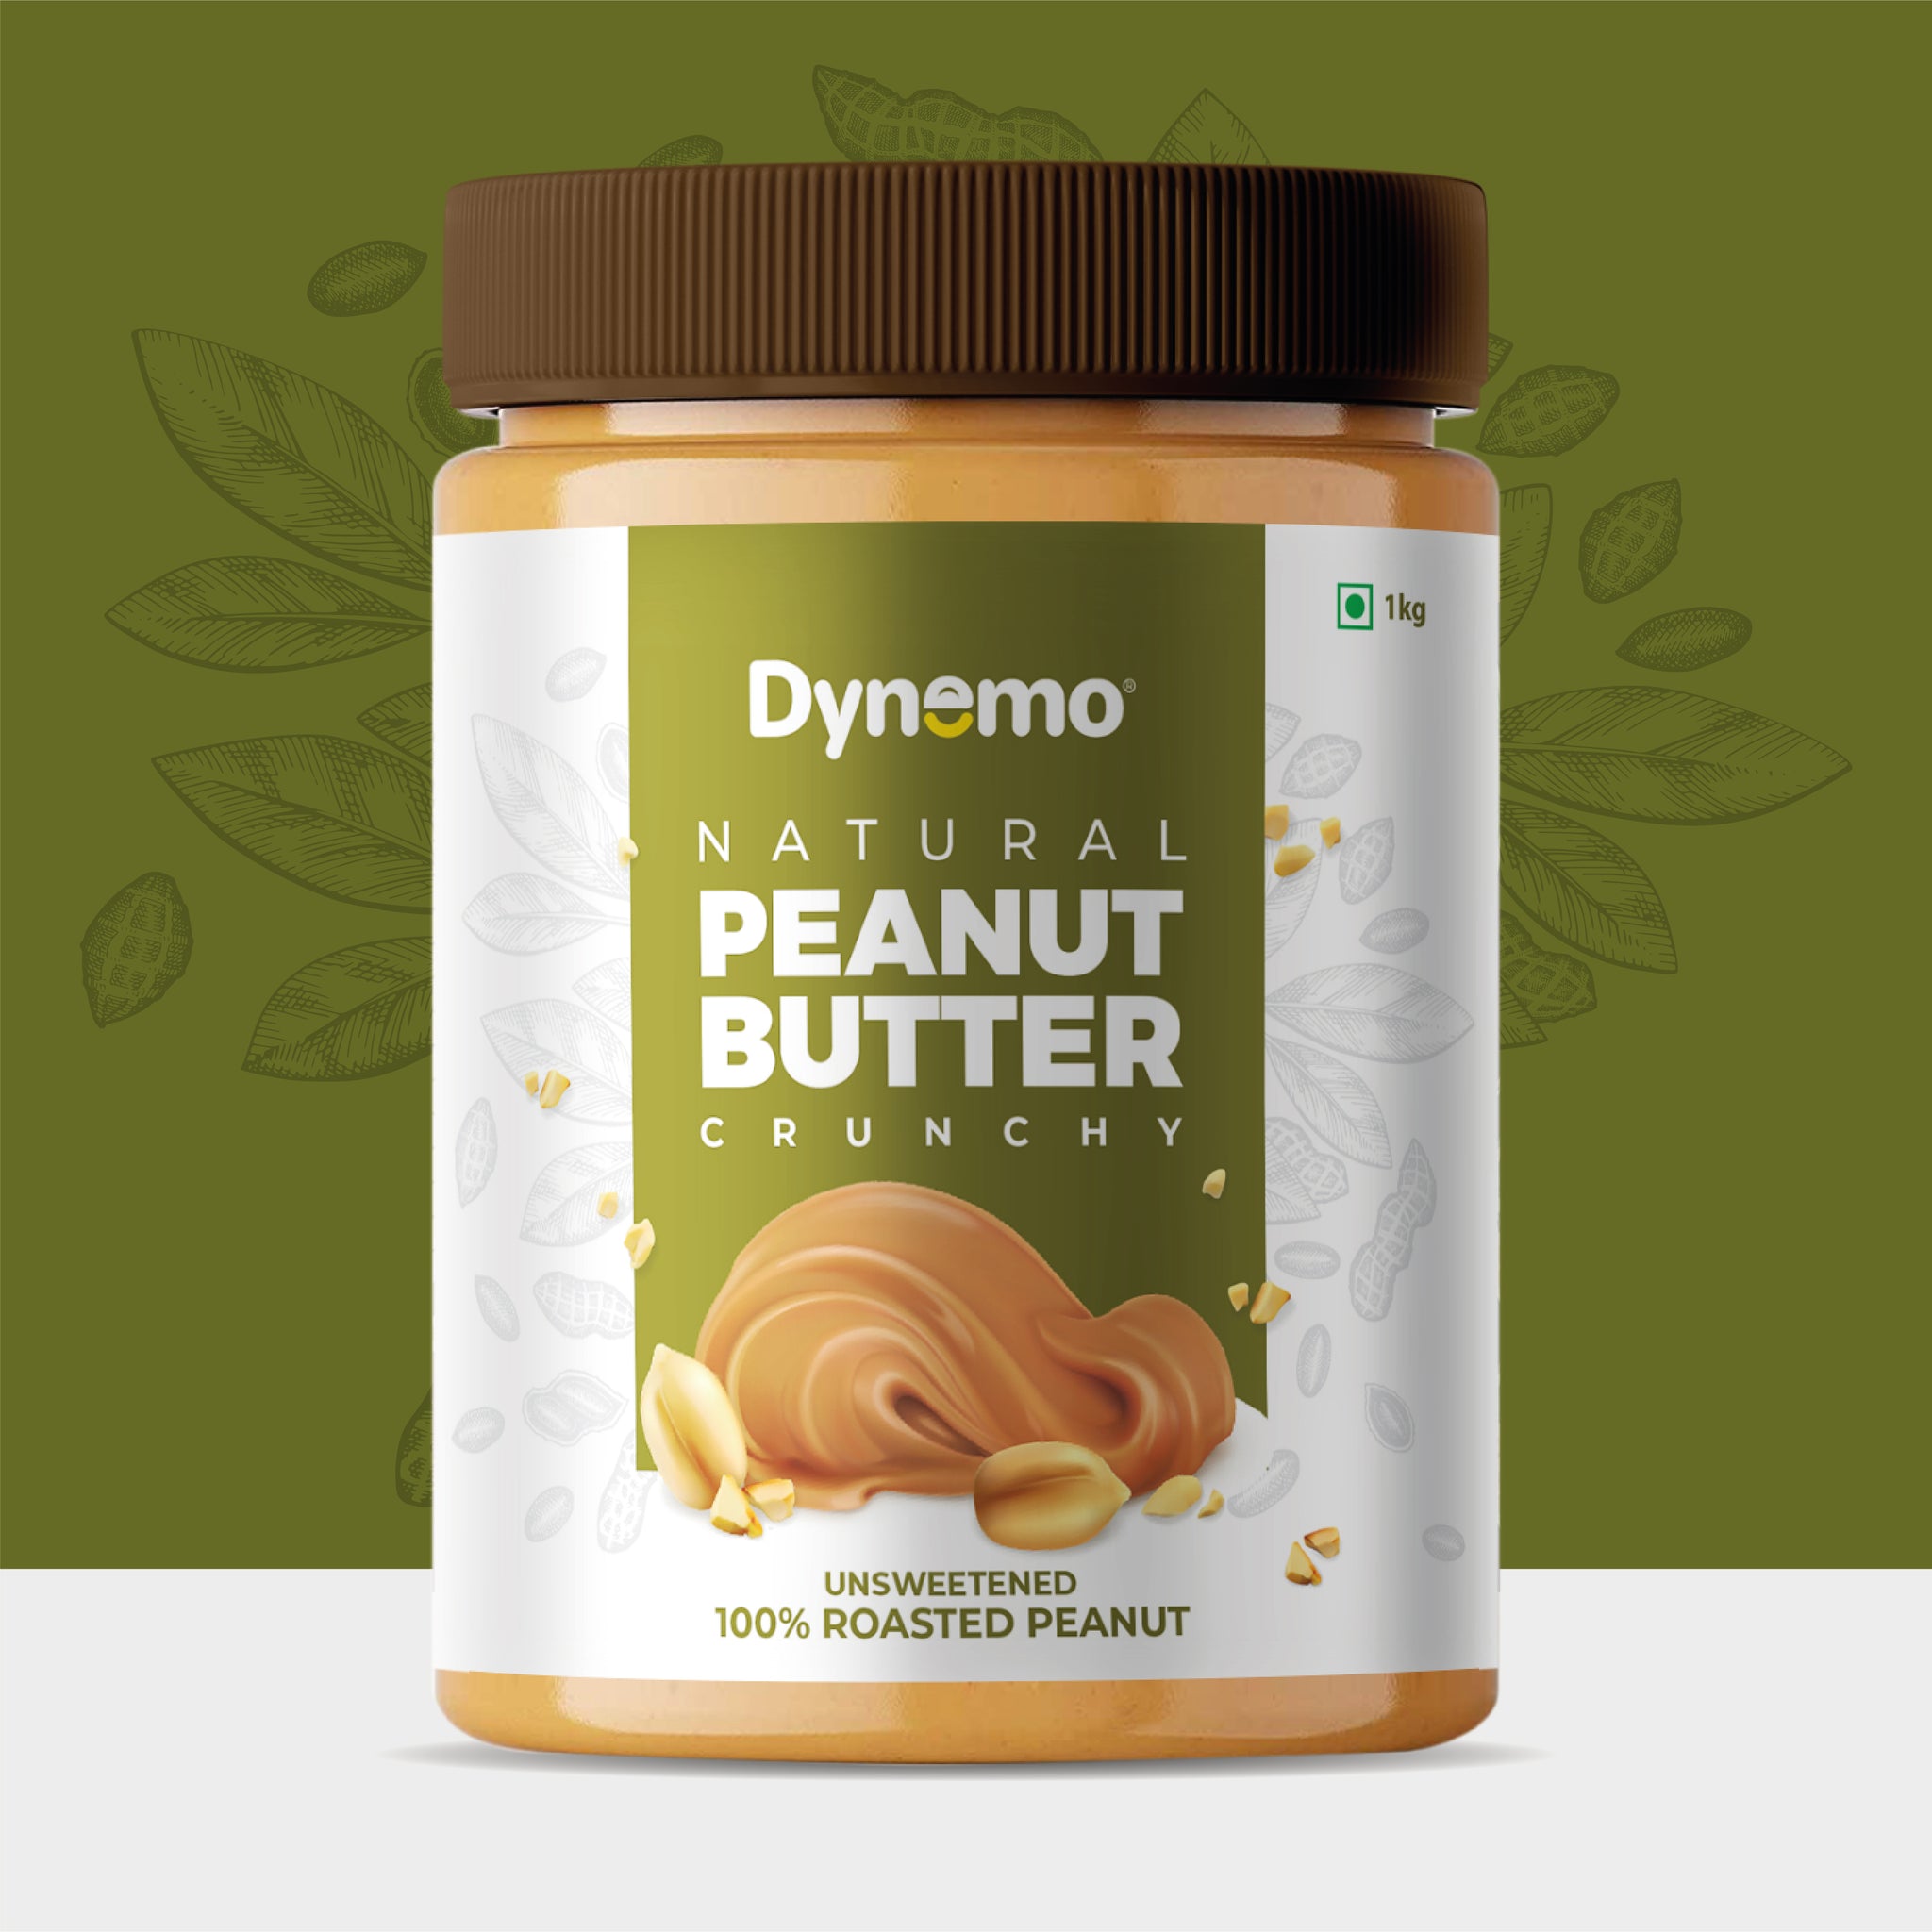 Dynemo Natural Crunchy Peanut Butter